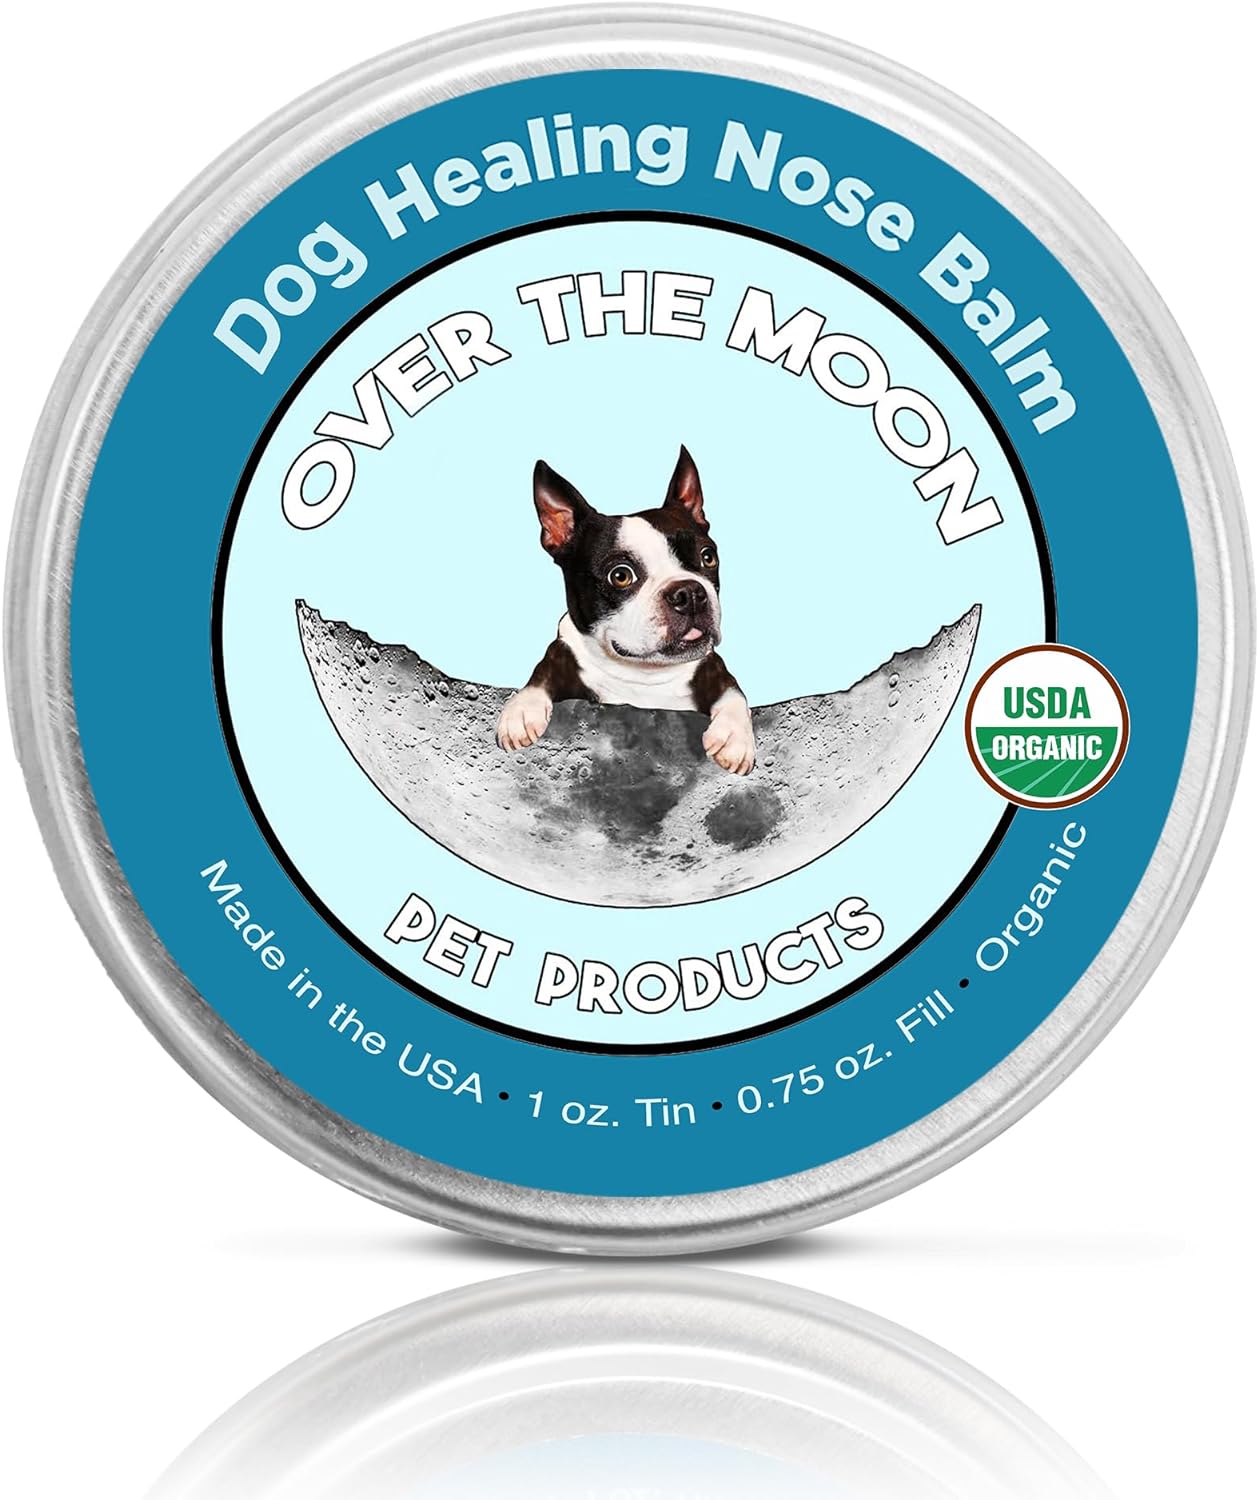 Over The Moon Pets Organic Dog Nose Balm- Unscented, Repairs Cracking, Dry Dog Noses, Dog Sunscreen, Veterinarian Recommended, Dog Paw Balm, Dog Cream, Cat Nose Balm (1oz)